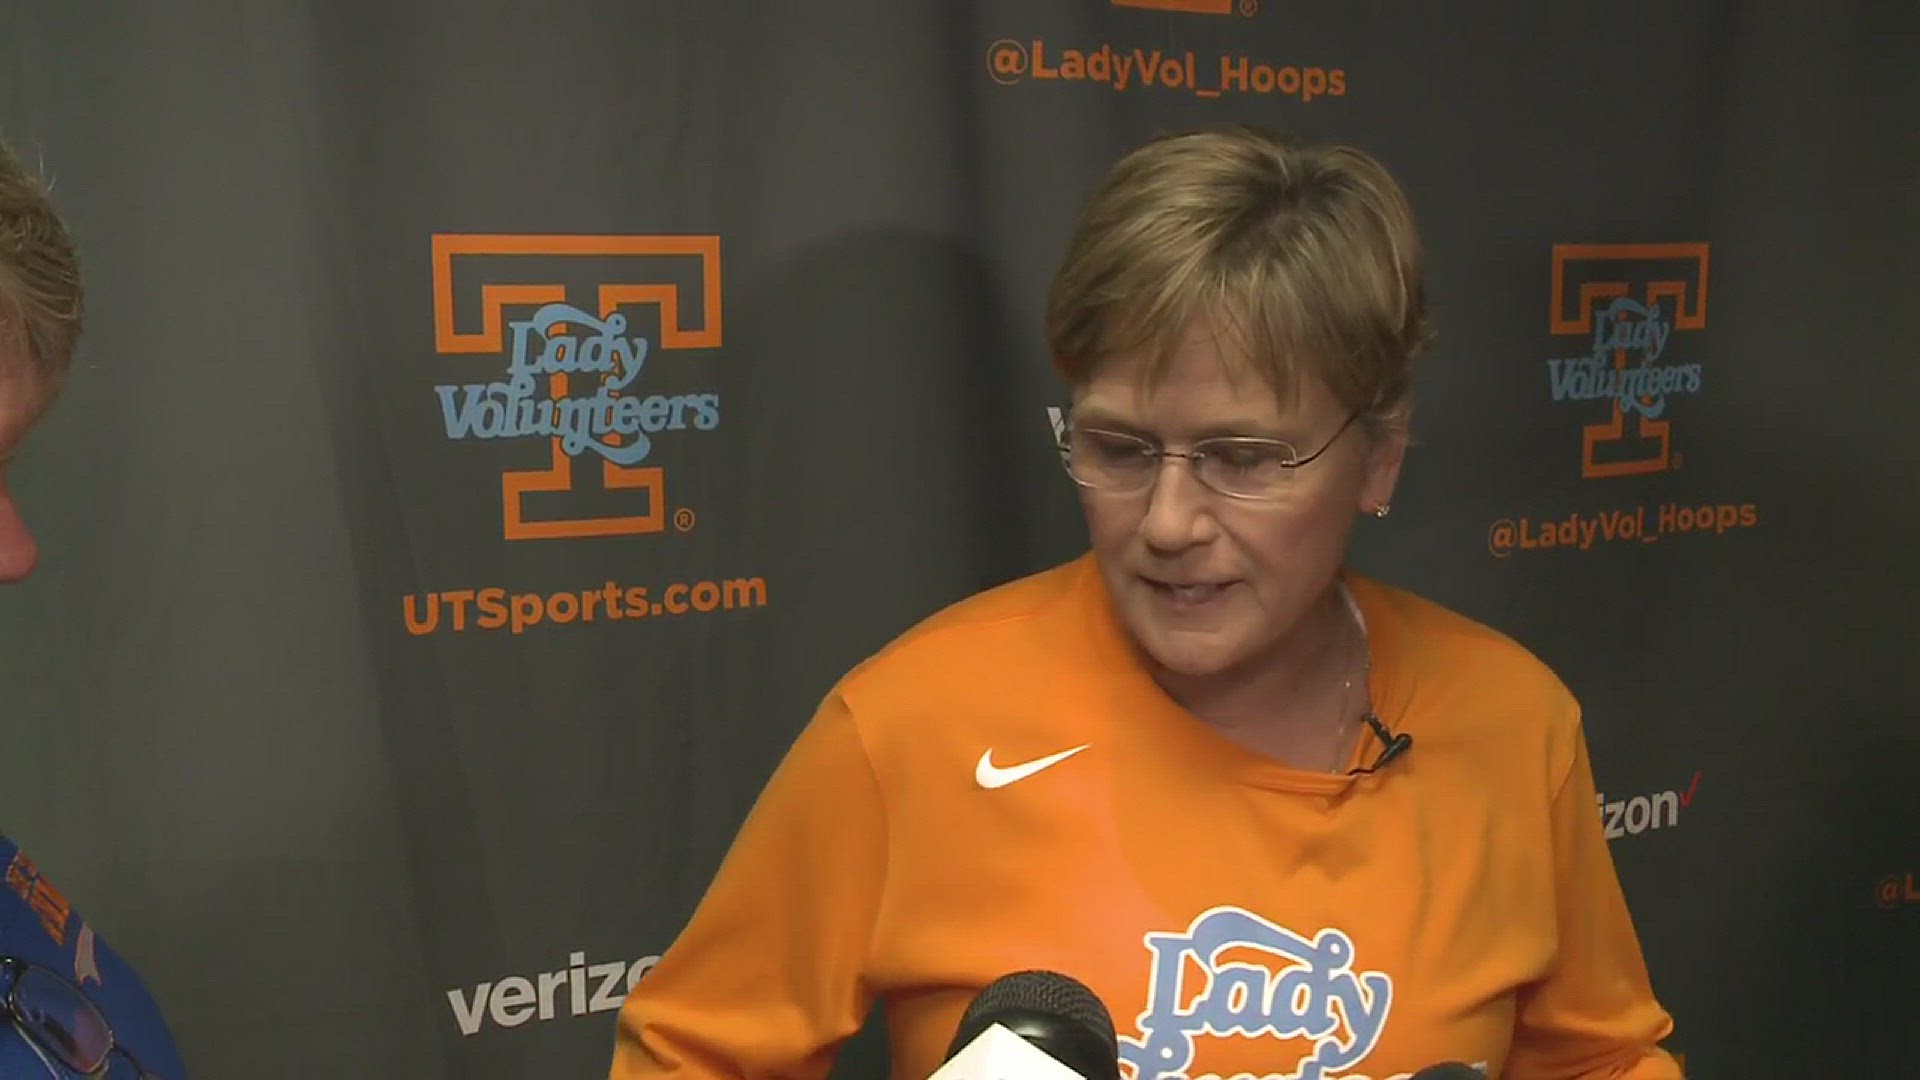 Lady Vols coach Holly Warlick talks about John Currie, Tennessee's new athletic director.